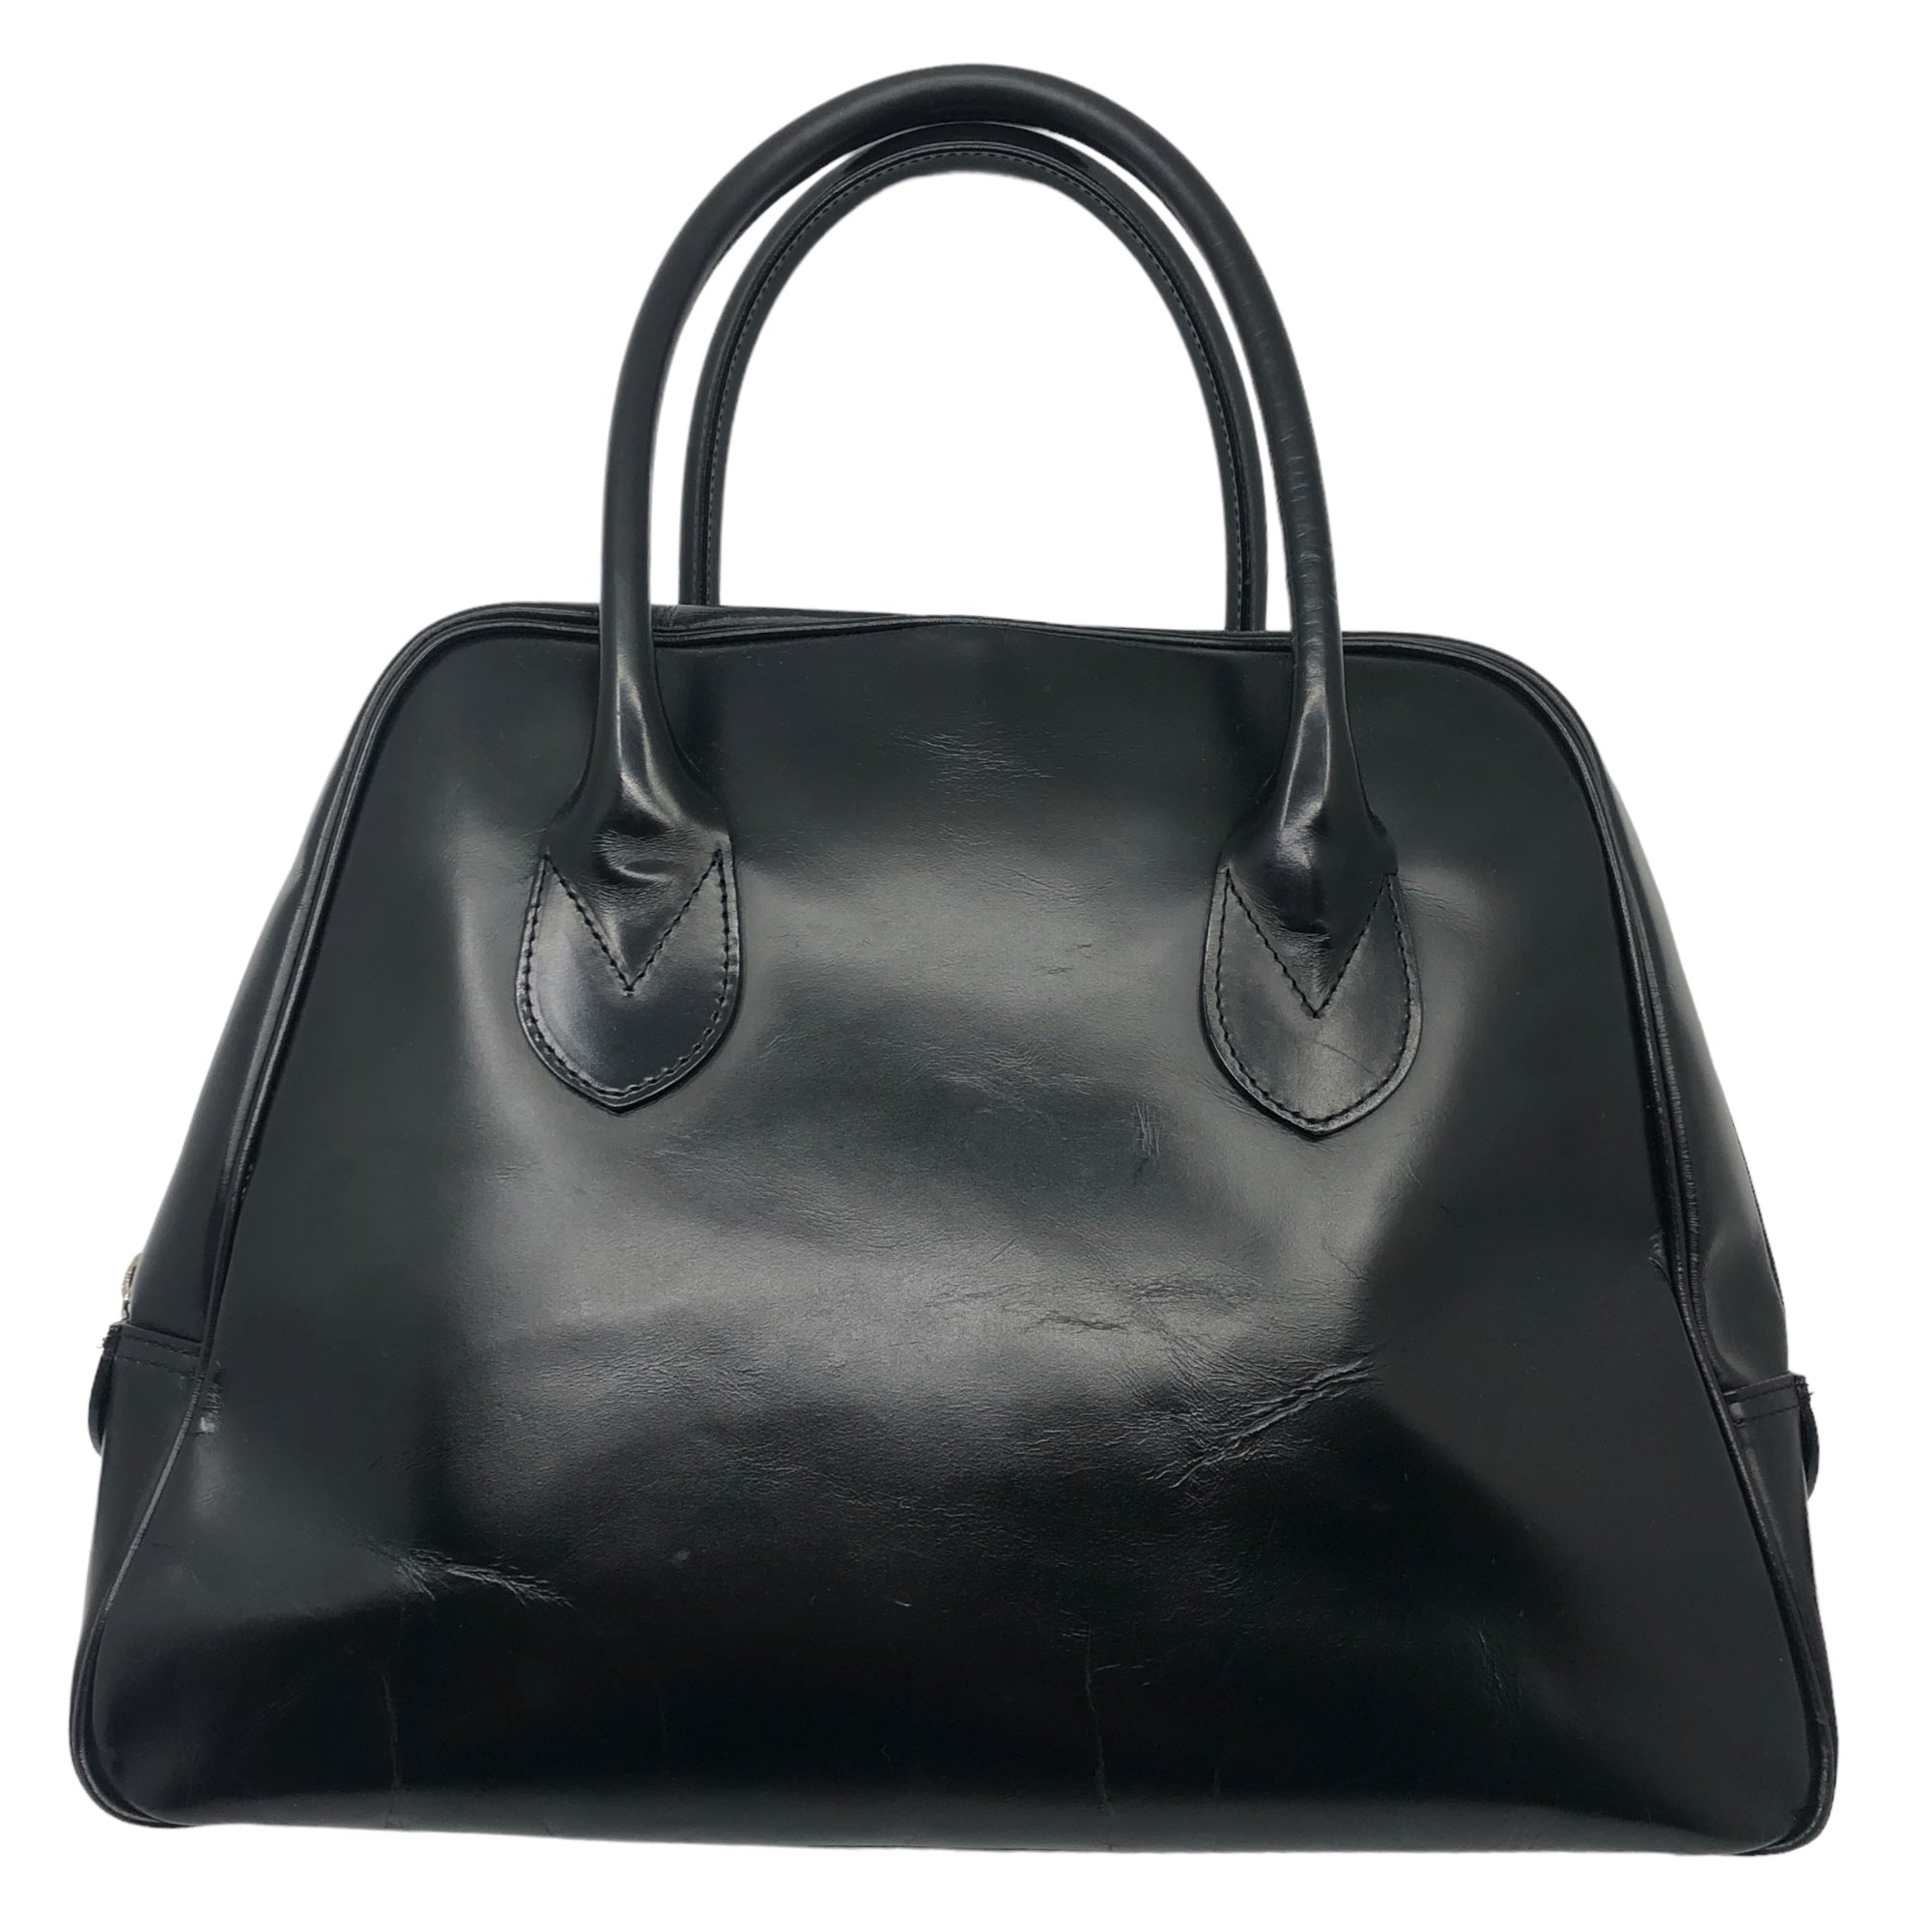 COMME des GARCONS(コムデギャルソン) Aoyama limited leather trapezoid bag 青山限定